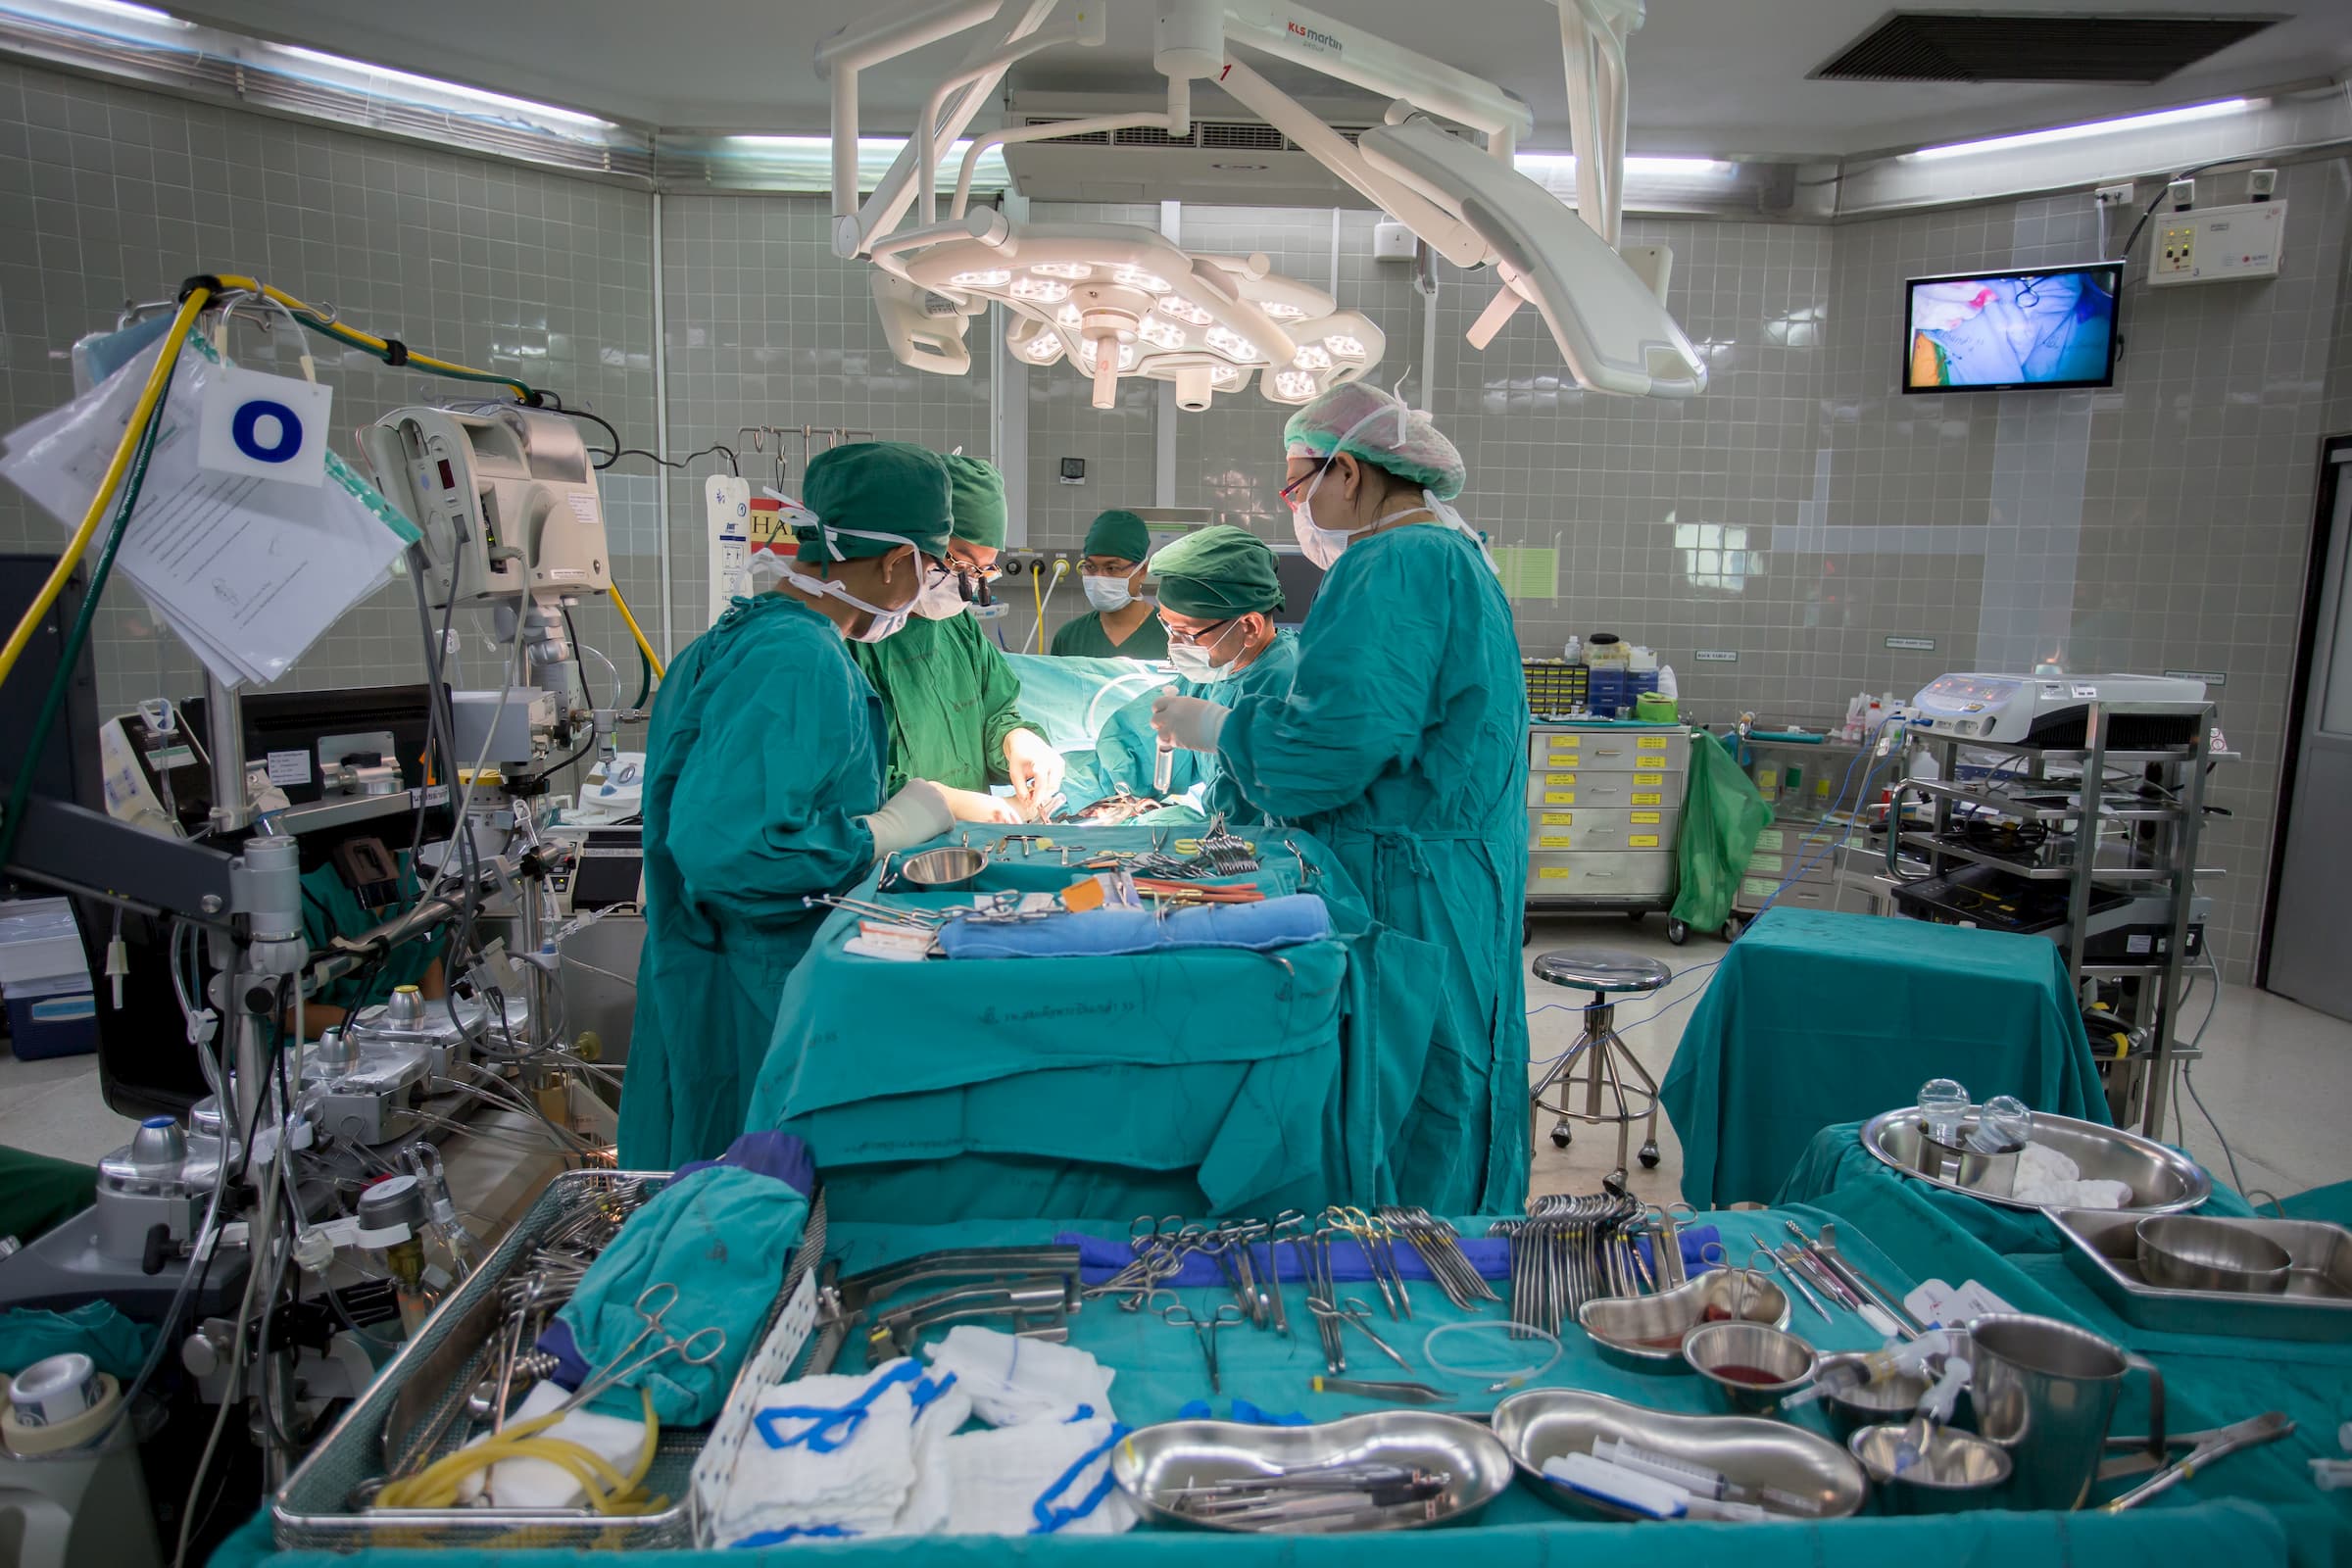 group of doctors inside operating room OR doing surgery on a patient who's on the table in drapes